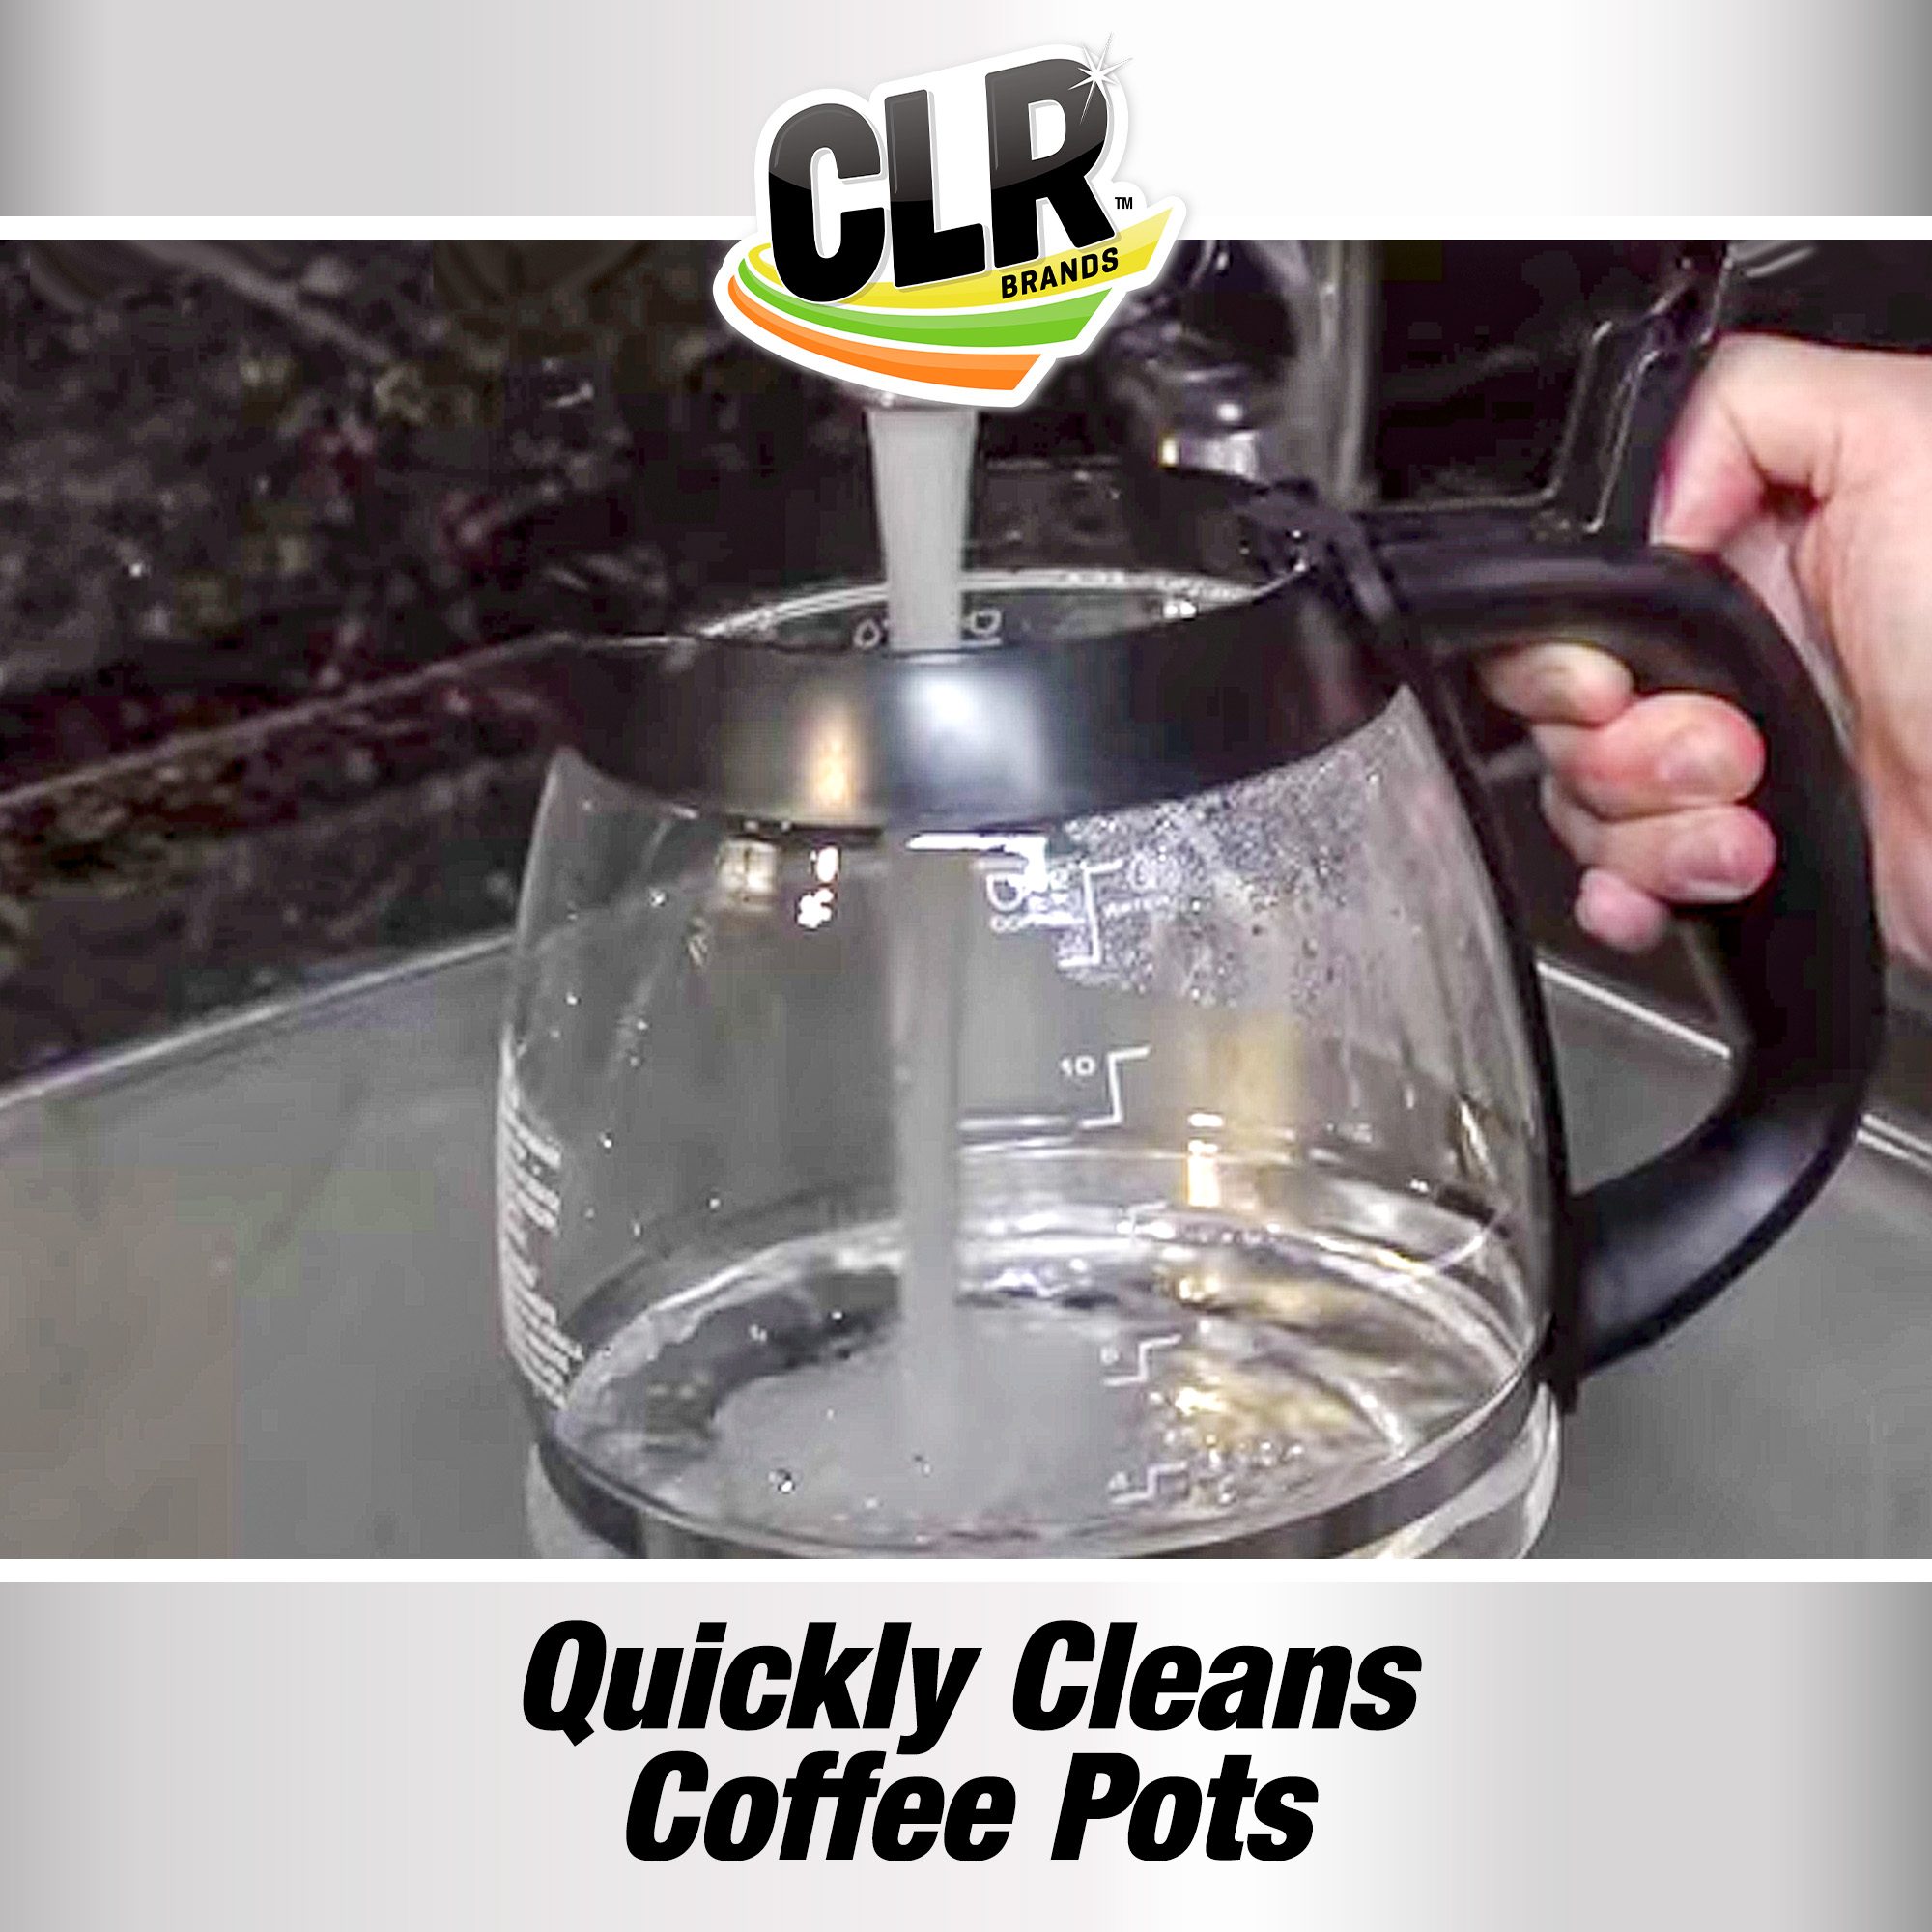 Clr Pro Rust Remover: Jug, 1 Gal Container size, Ready to Use, Liquid